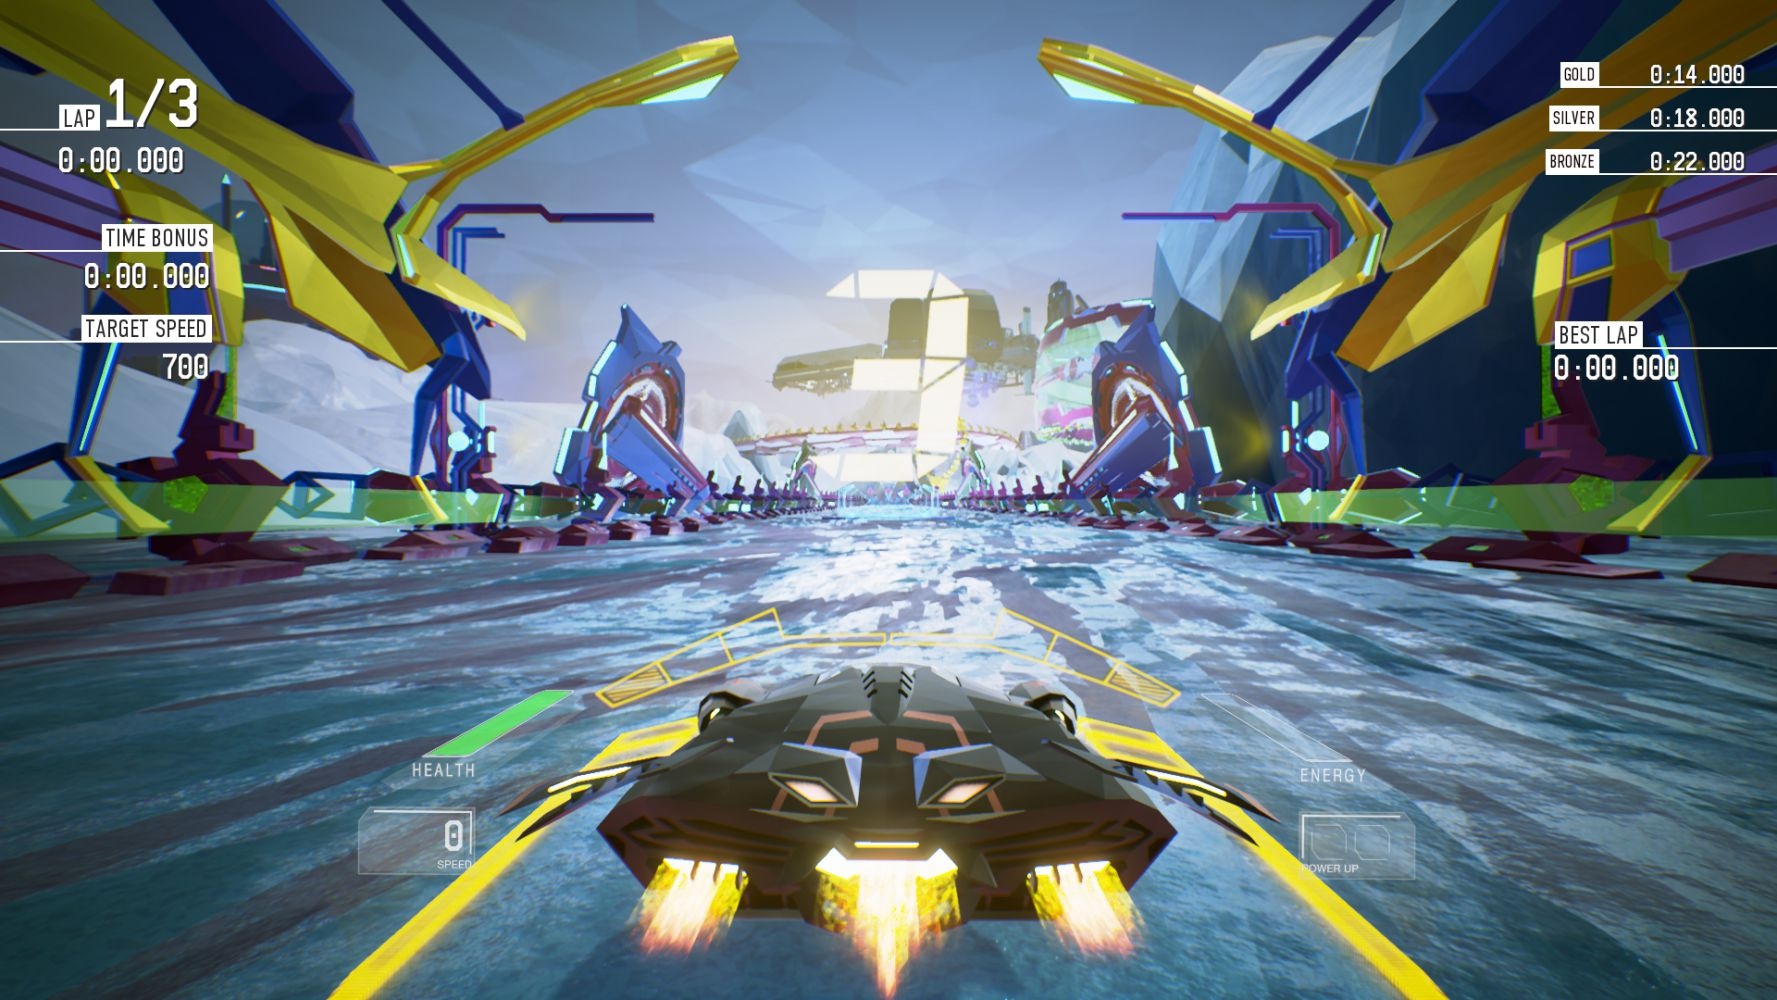 Redout coming to Switch on May 14